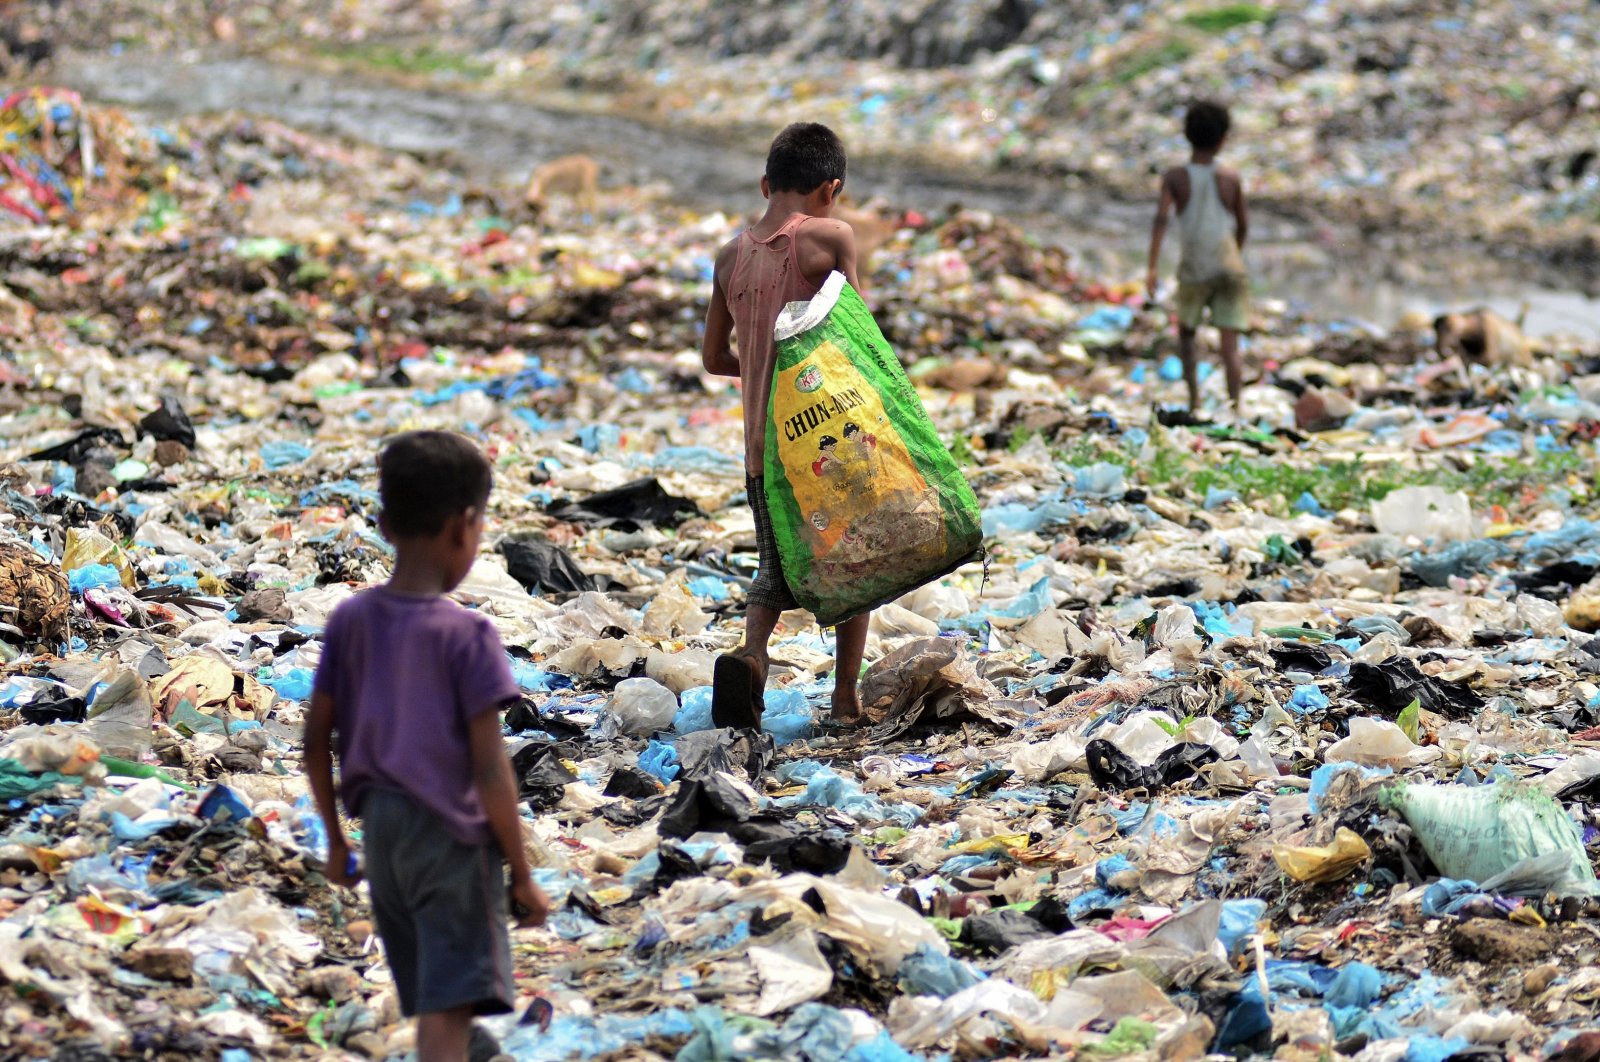 Indian children search for recyclable items as they walk through a garbage dump in Dimapur, in the northeastern state of Nagaland, India, June 5, 2017. (AFP Photo)